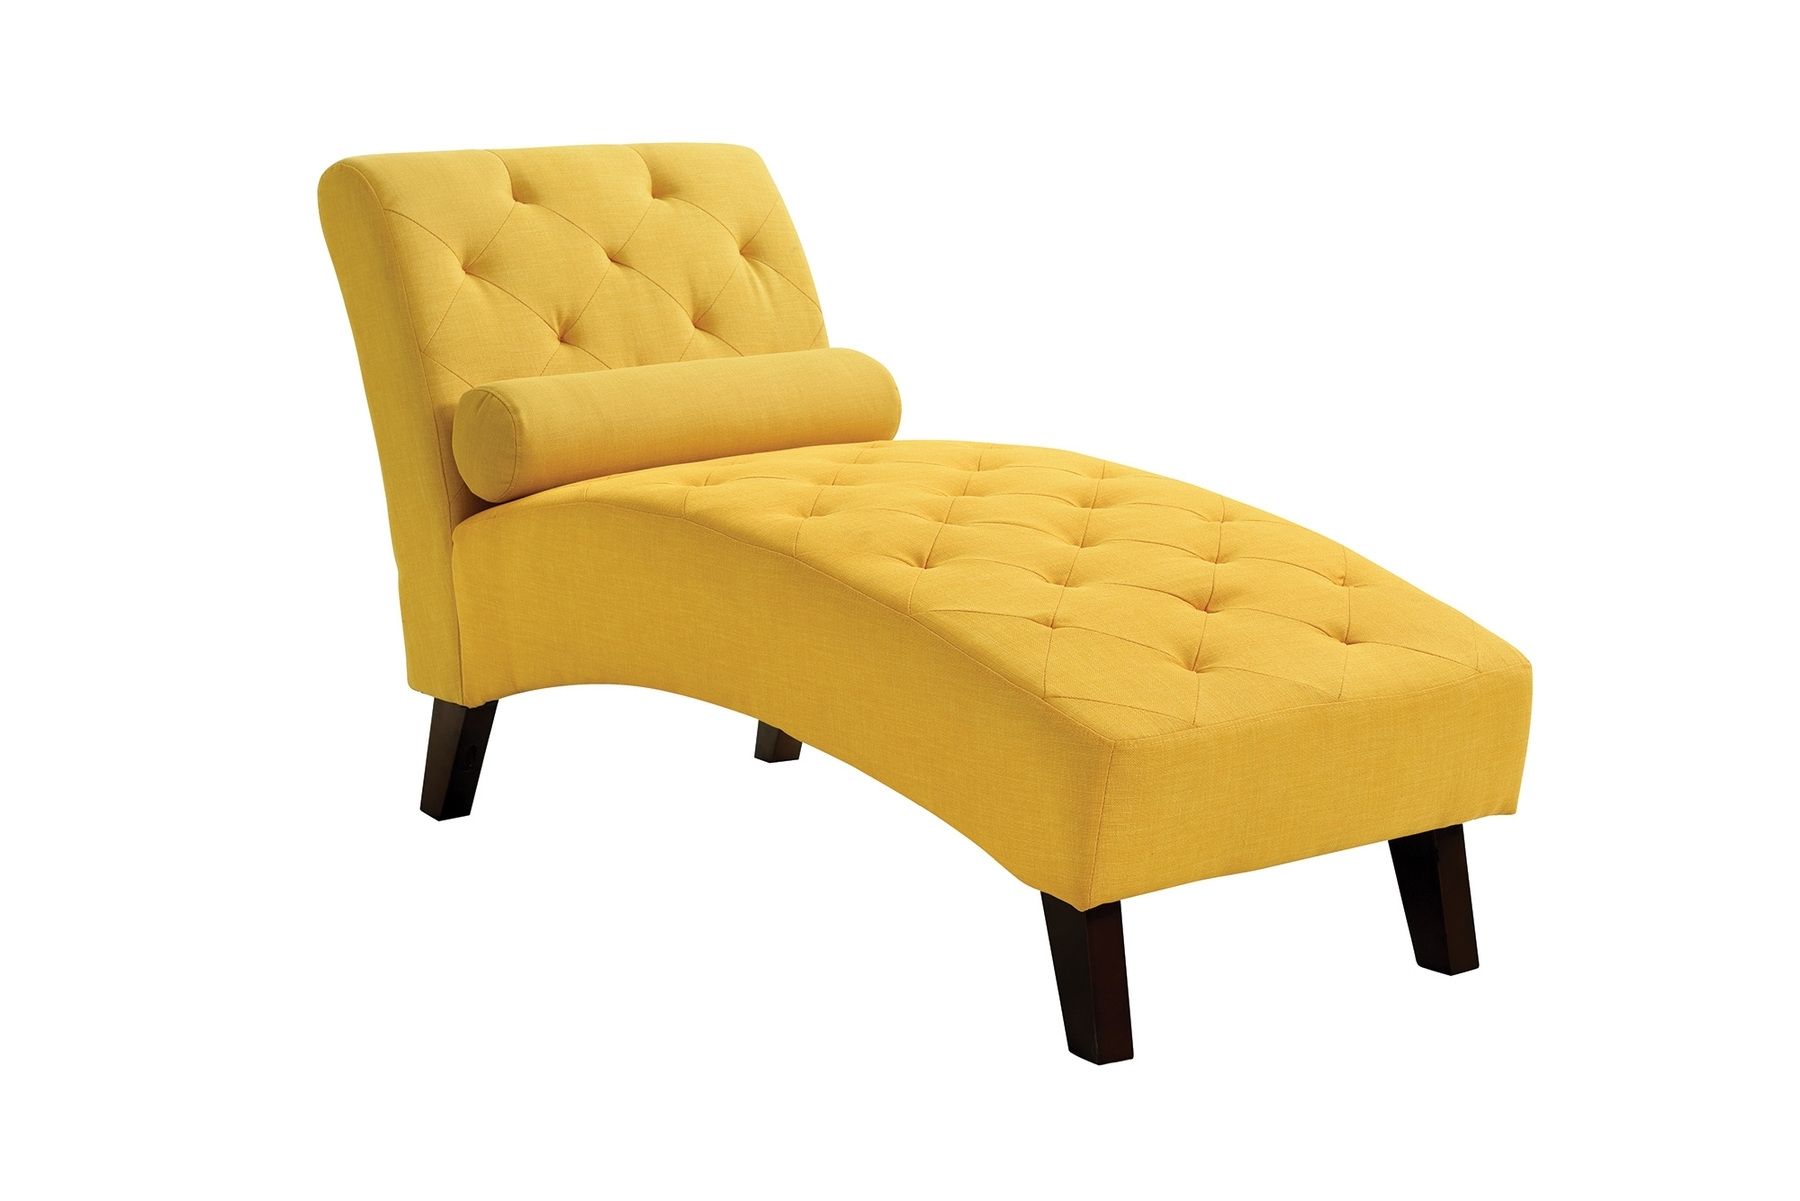 Widely Used Yellow Chaise Lounge Chairs Within Newbury Yellow Chaise G256 Glory Furniture Chaises, Lounge Chairs (View 5 of 15)